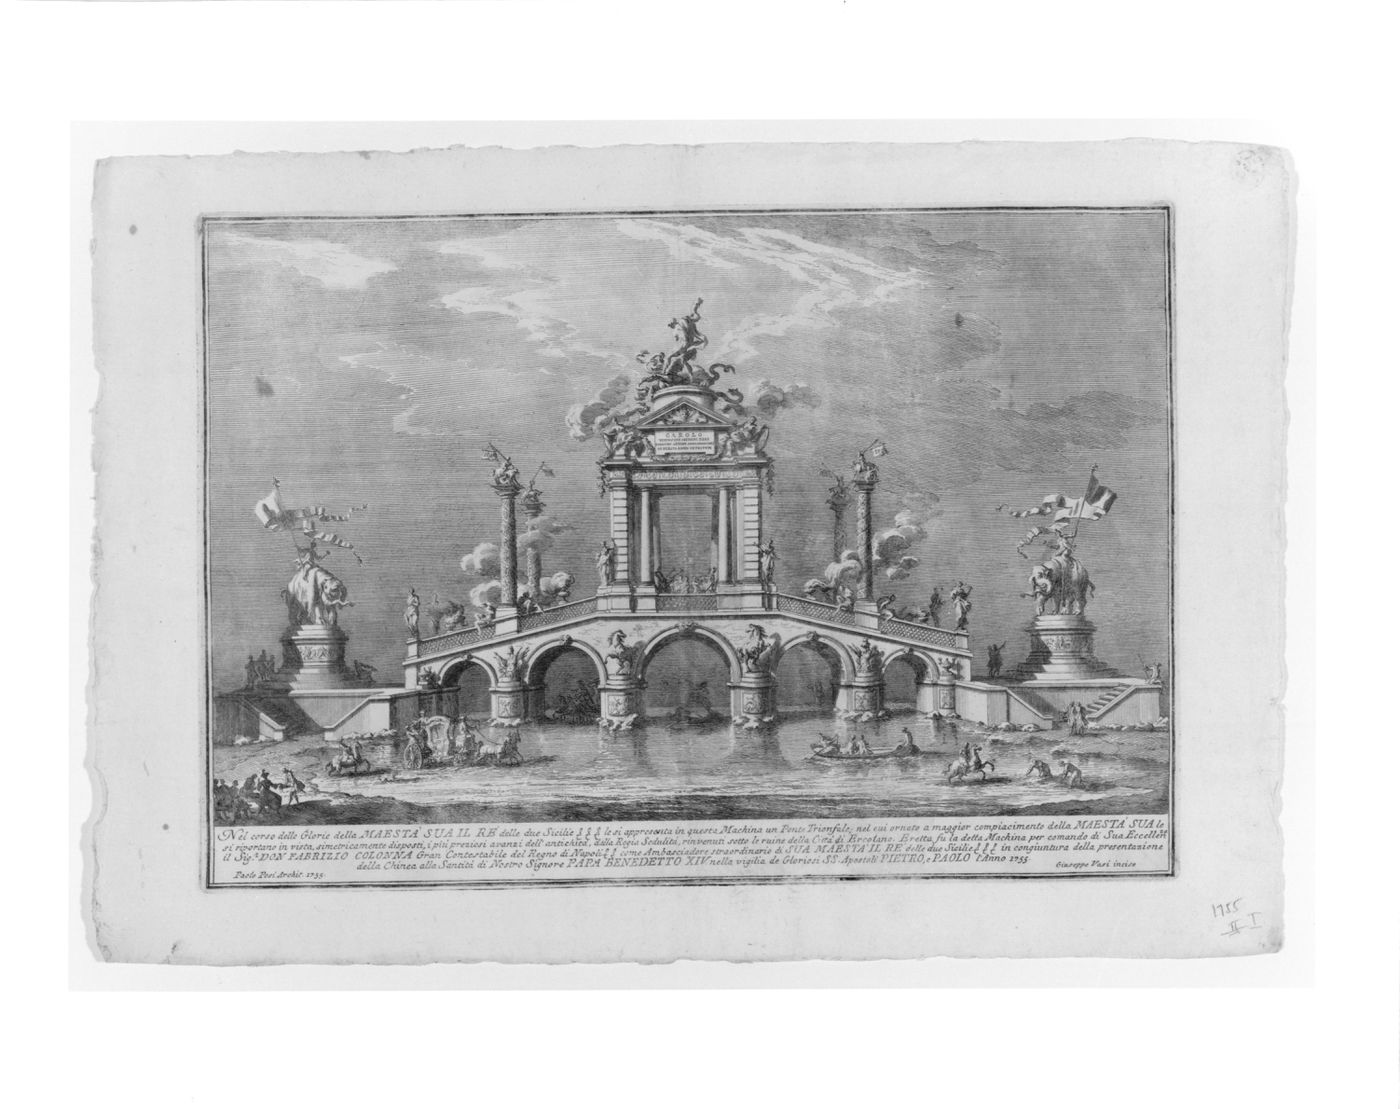 Etching of Posi's design for the "prima macchina" of 1755